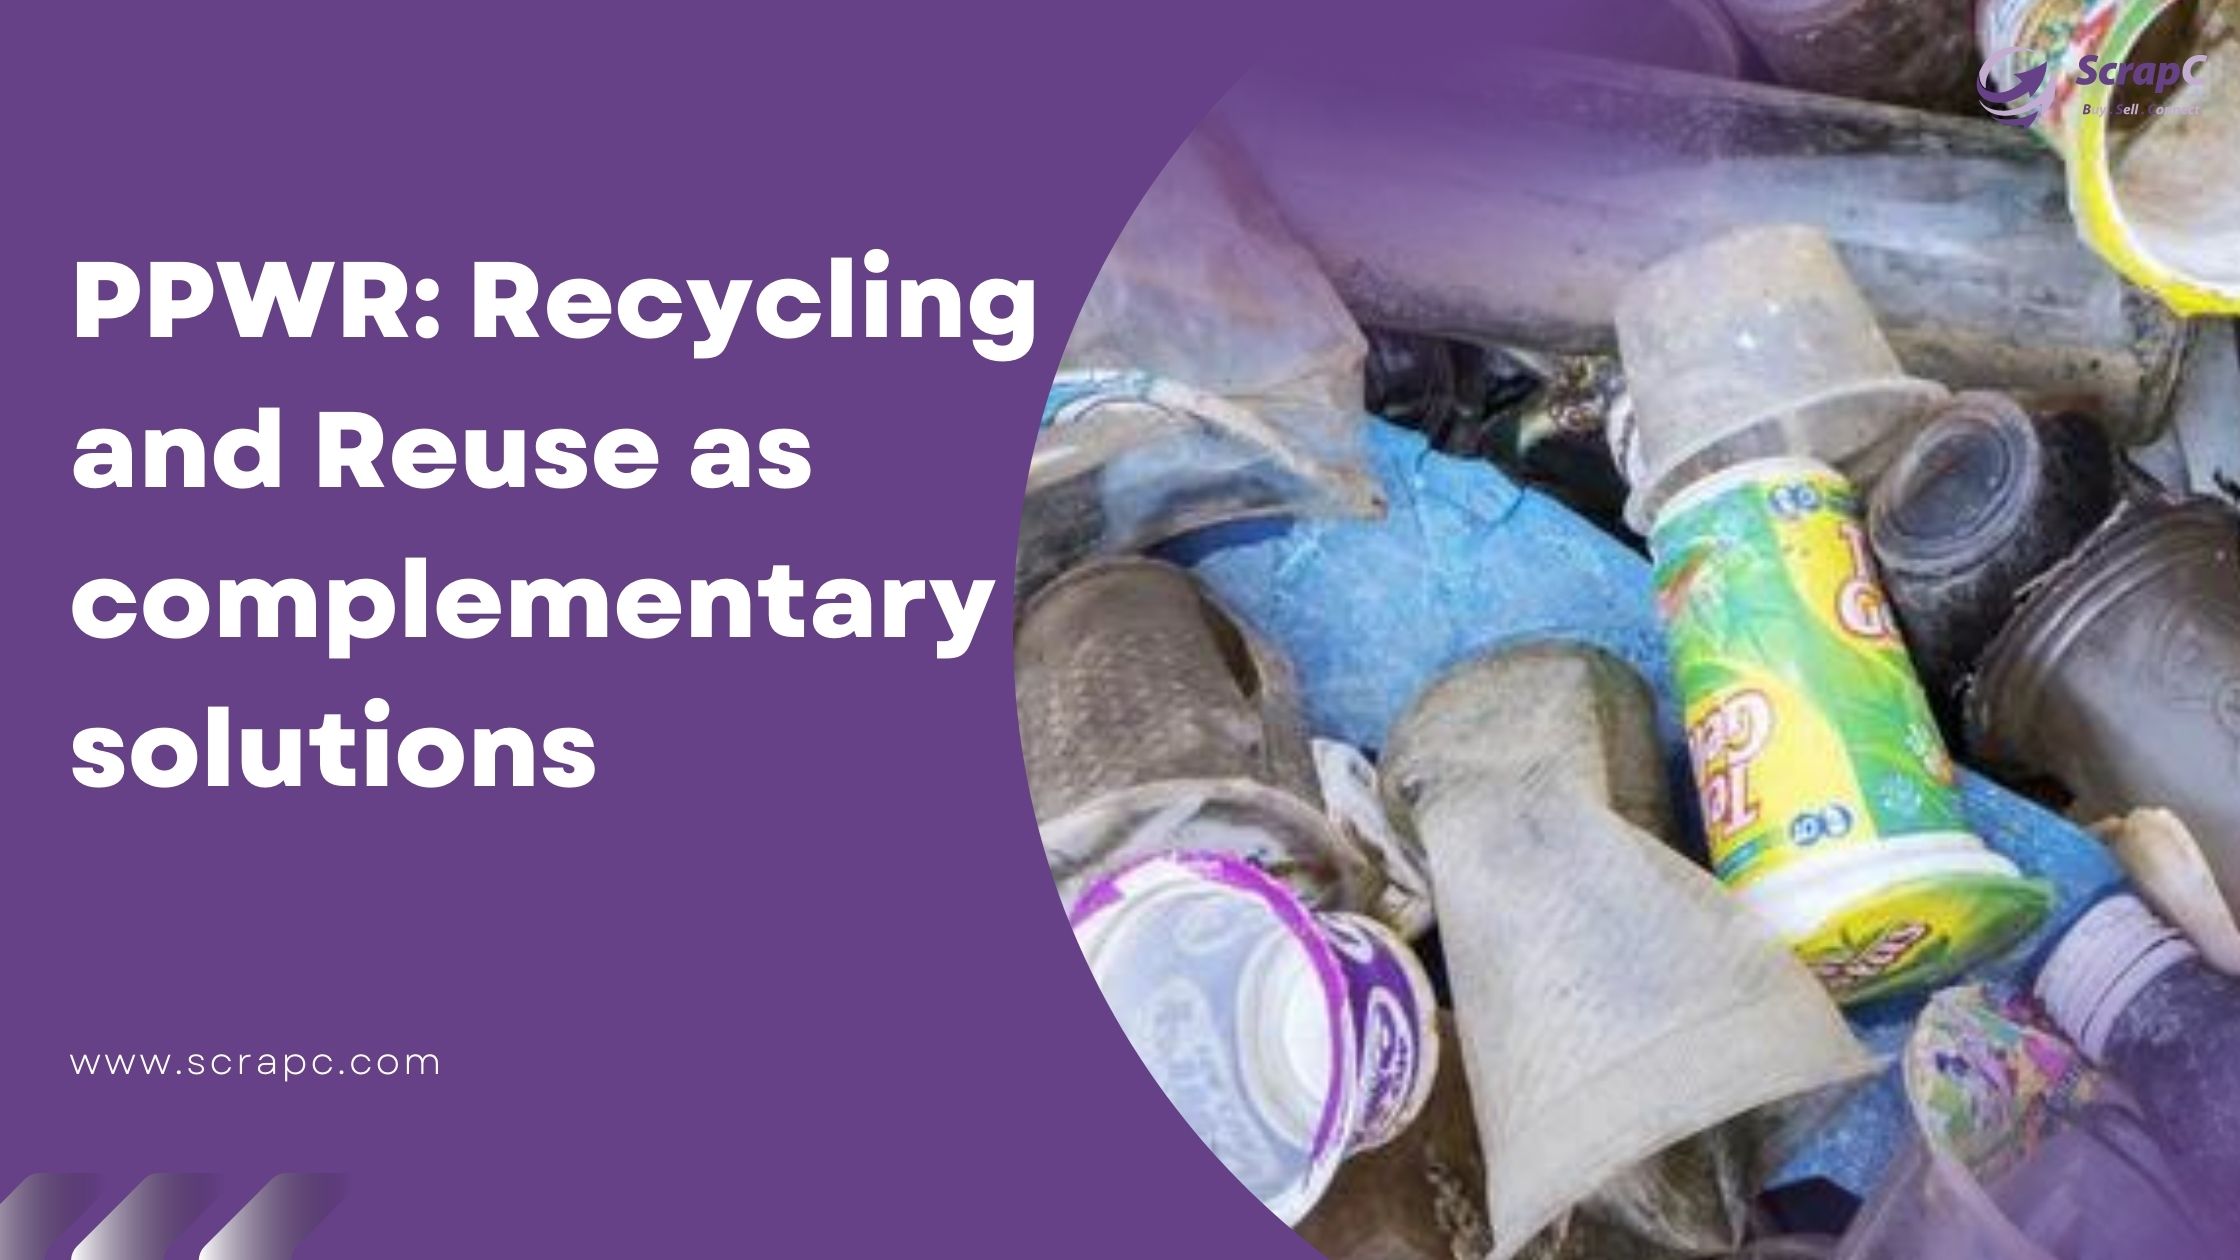 Packaging and Packaging Waste Regulation (PPWR) - Recycling and Reuse as Complementary Solutions for Sustainable Packaging